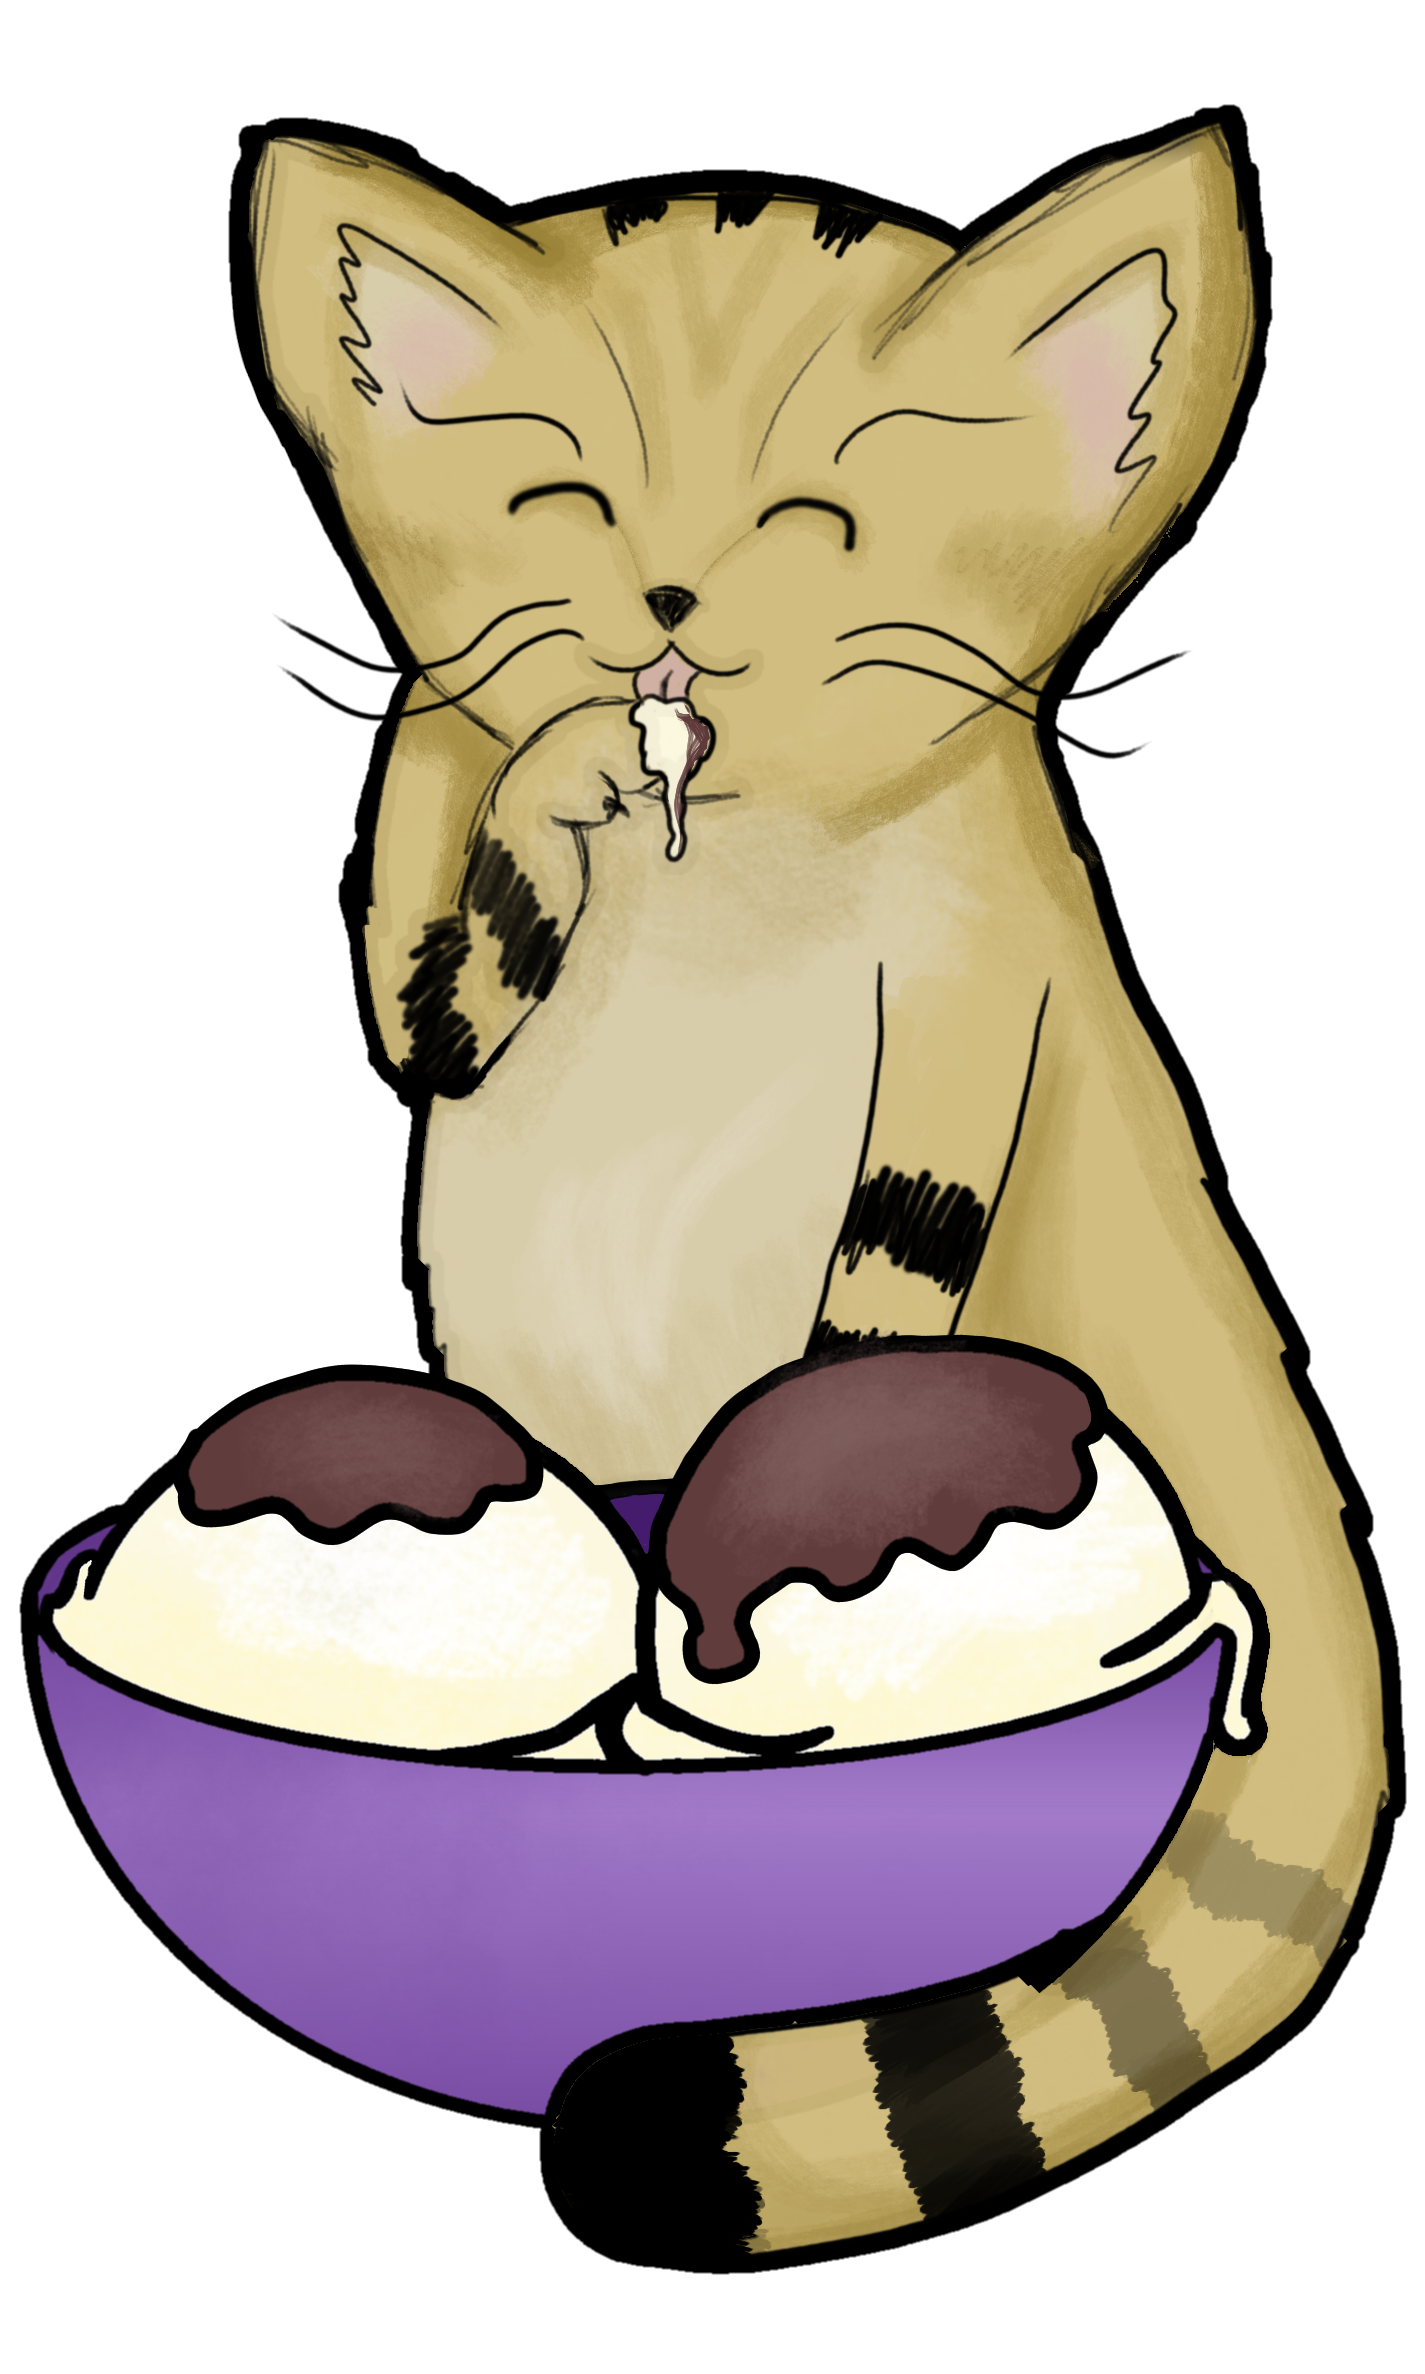 A wide-eared yellow cat next to a bowl of ice cream scoops that are topped with chocolate syrup. The sand cat ('felis margarita') is licking a drip off a paw. Made for a friend's social media.